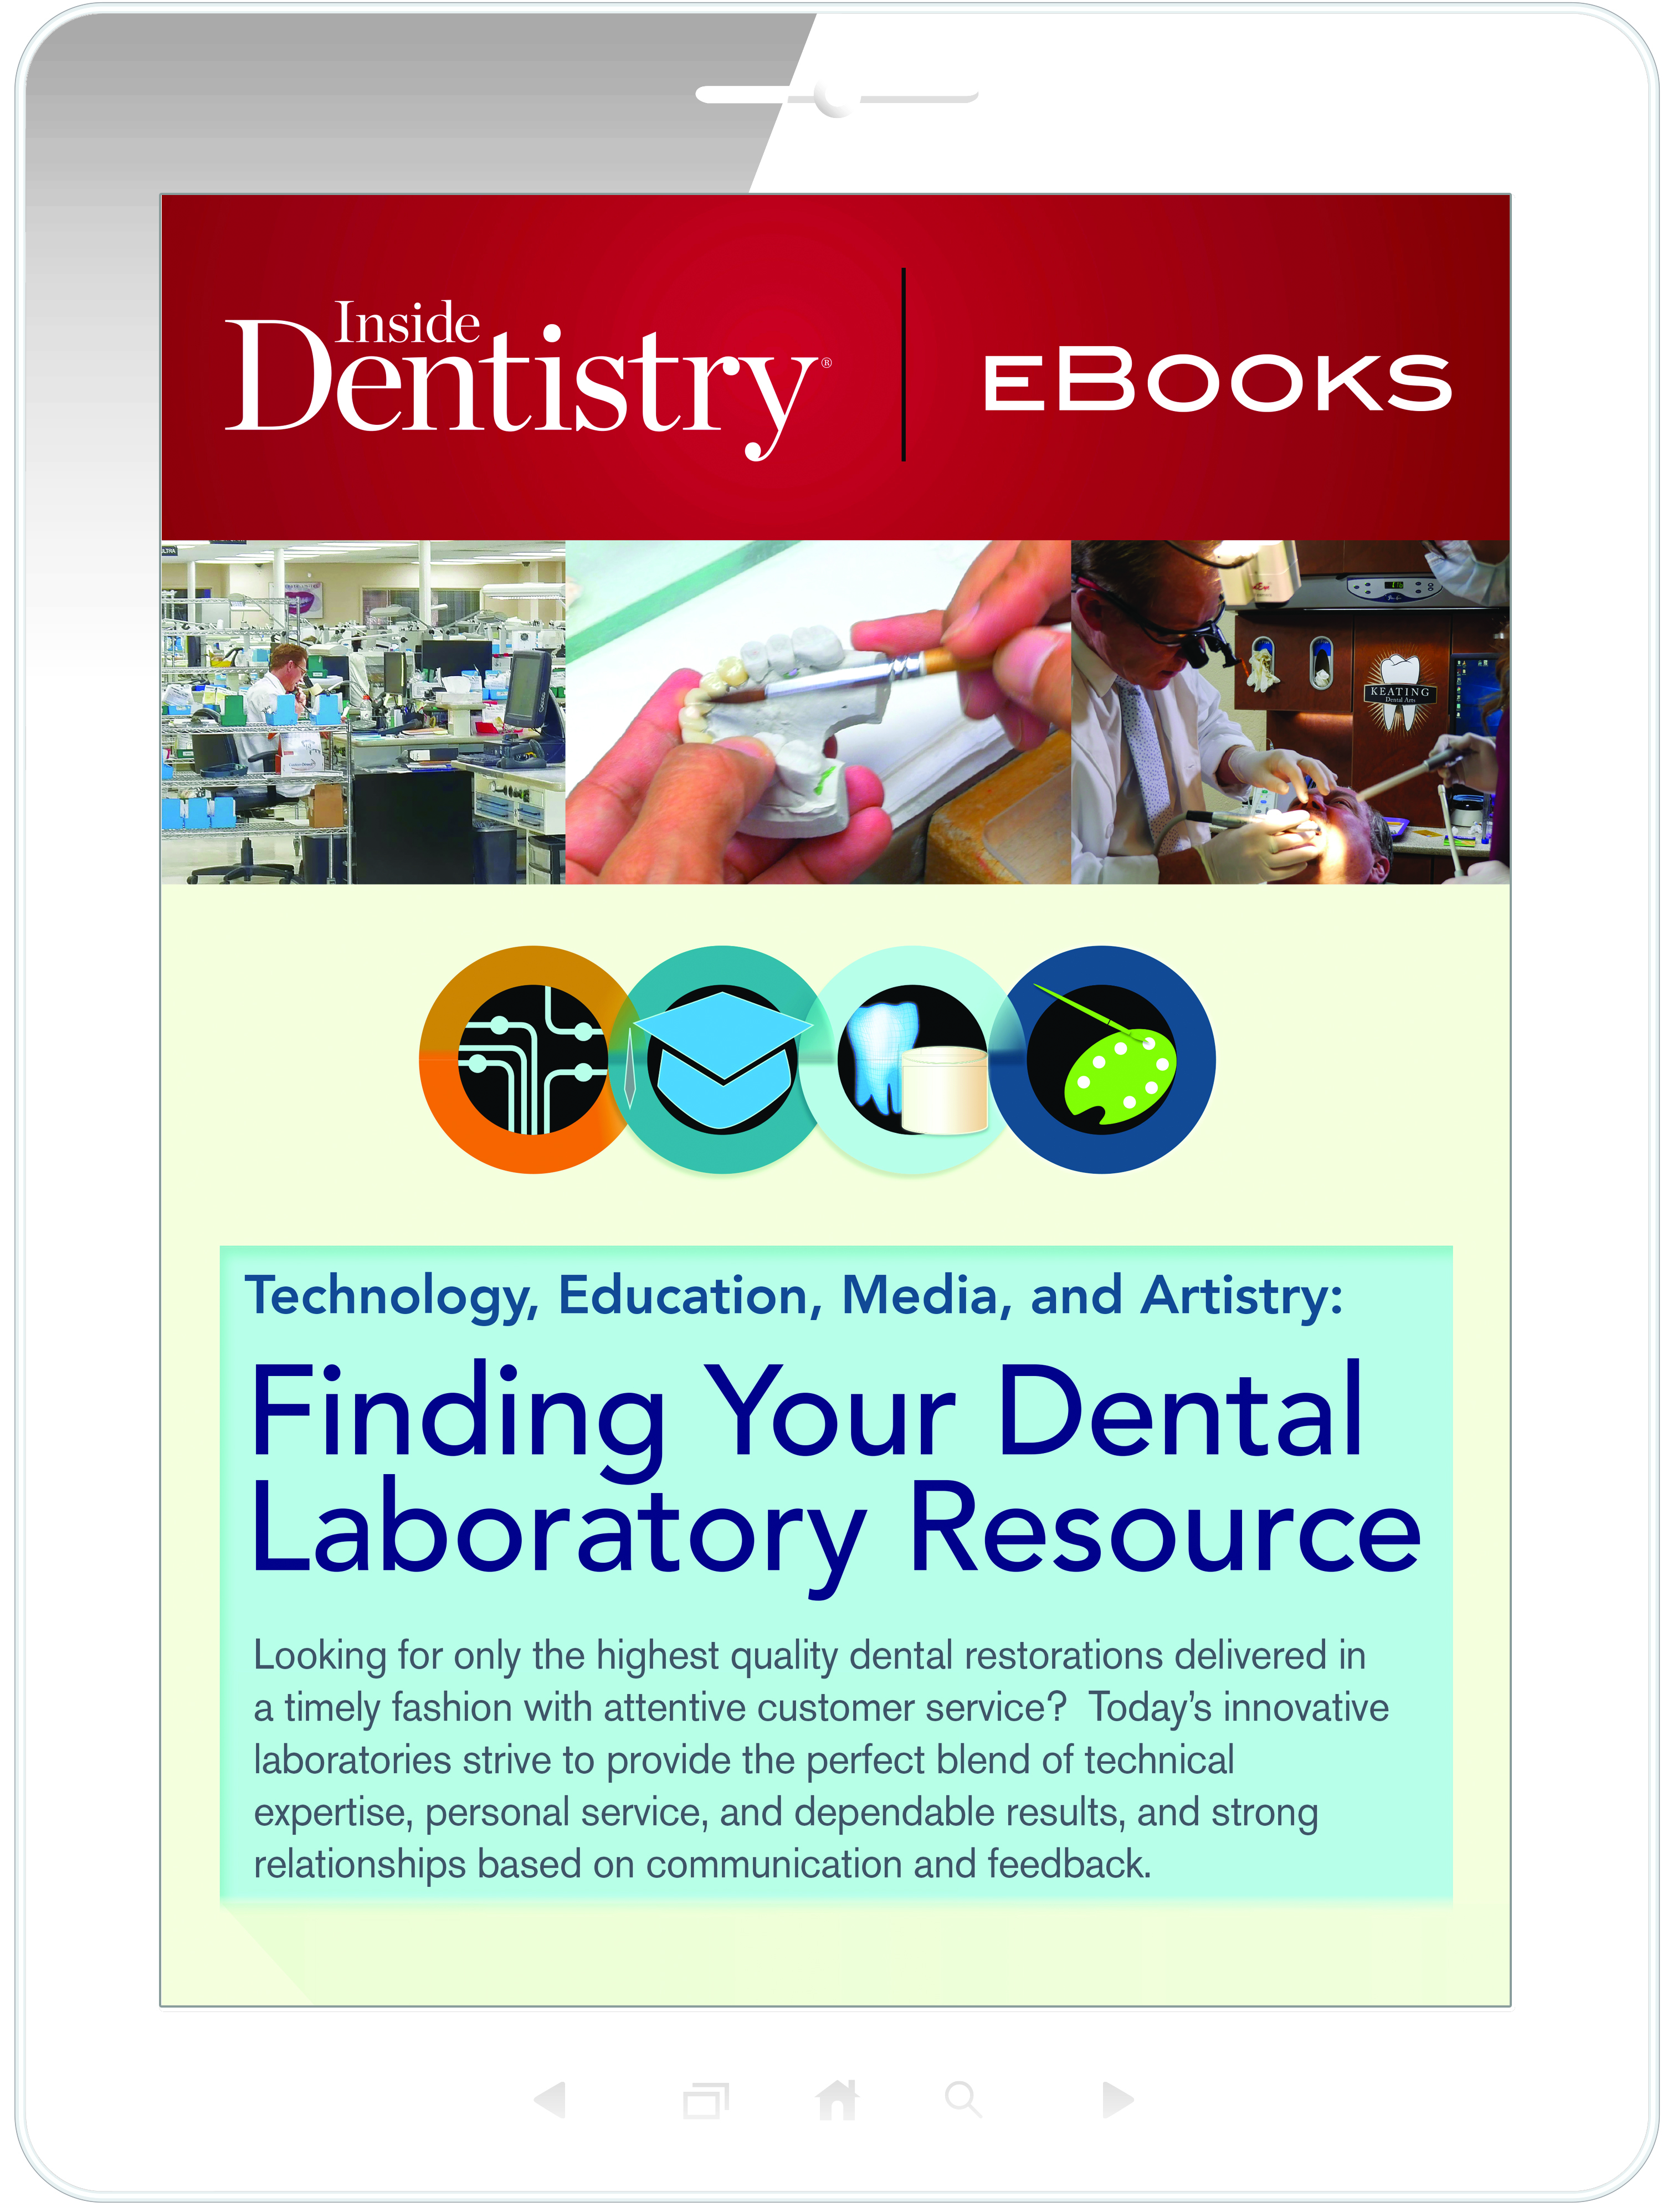 Technology, Education, Media, and Artistry: Finding Your Dental Laboratory Resource Ebook Cover